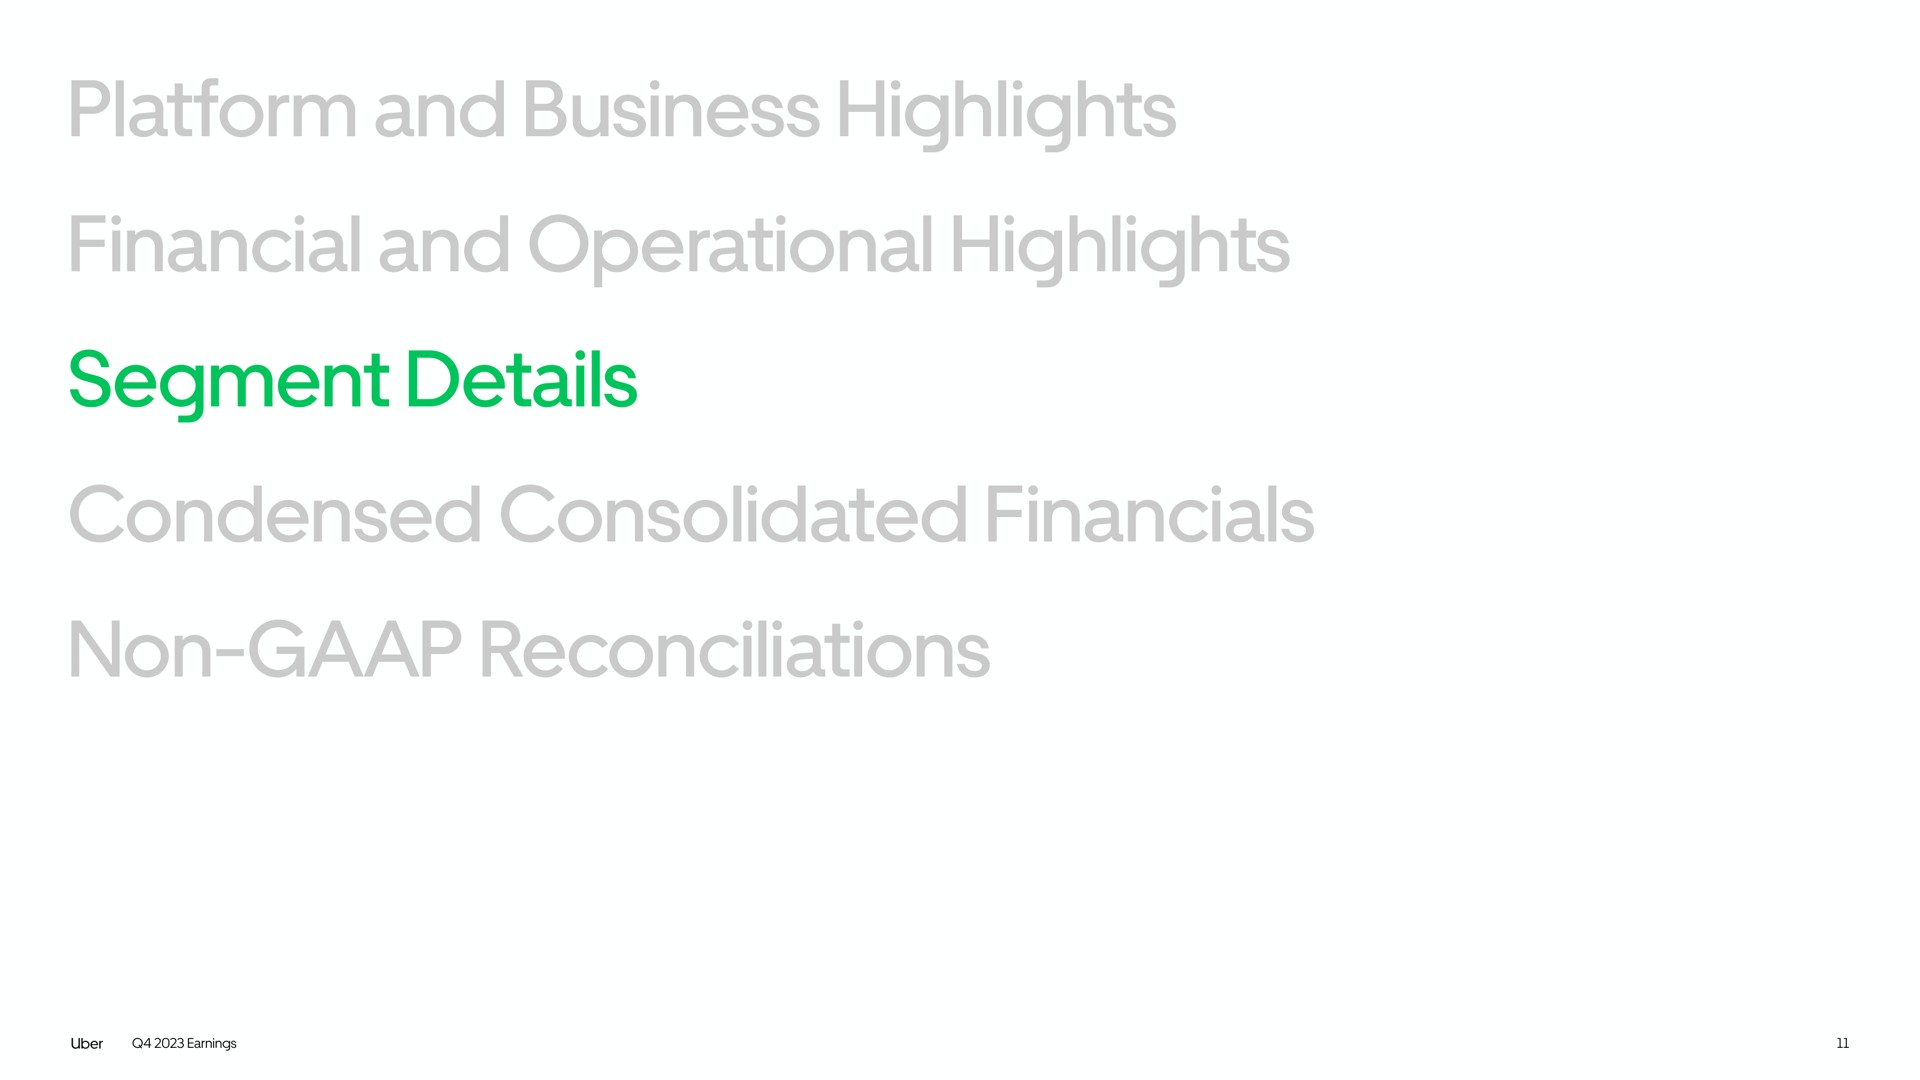 platform and business highlights financial and operational highlights segment details condensed consolidated non reconciliations | Uber